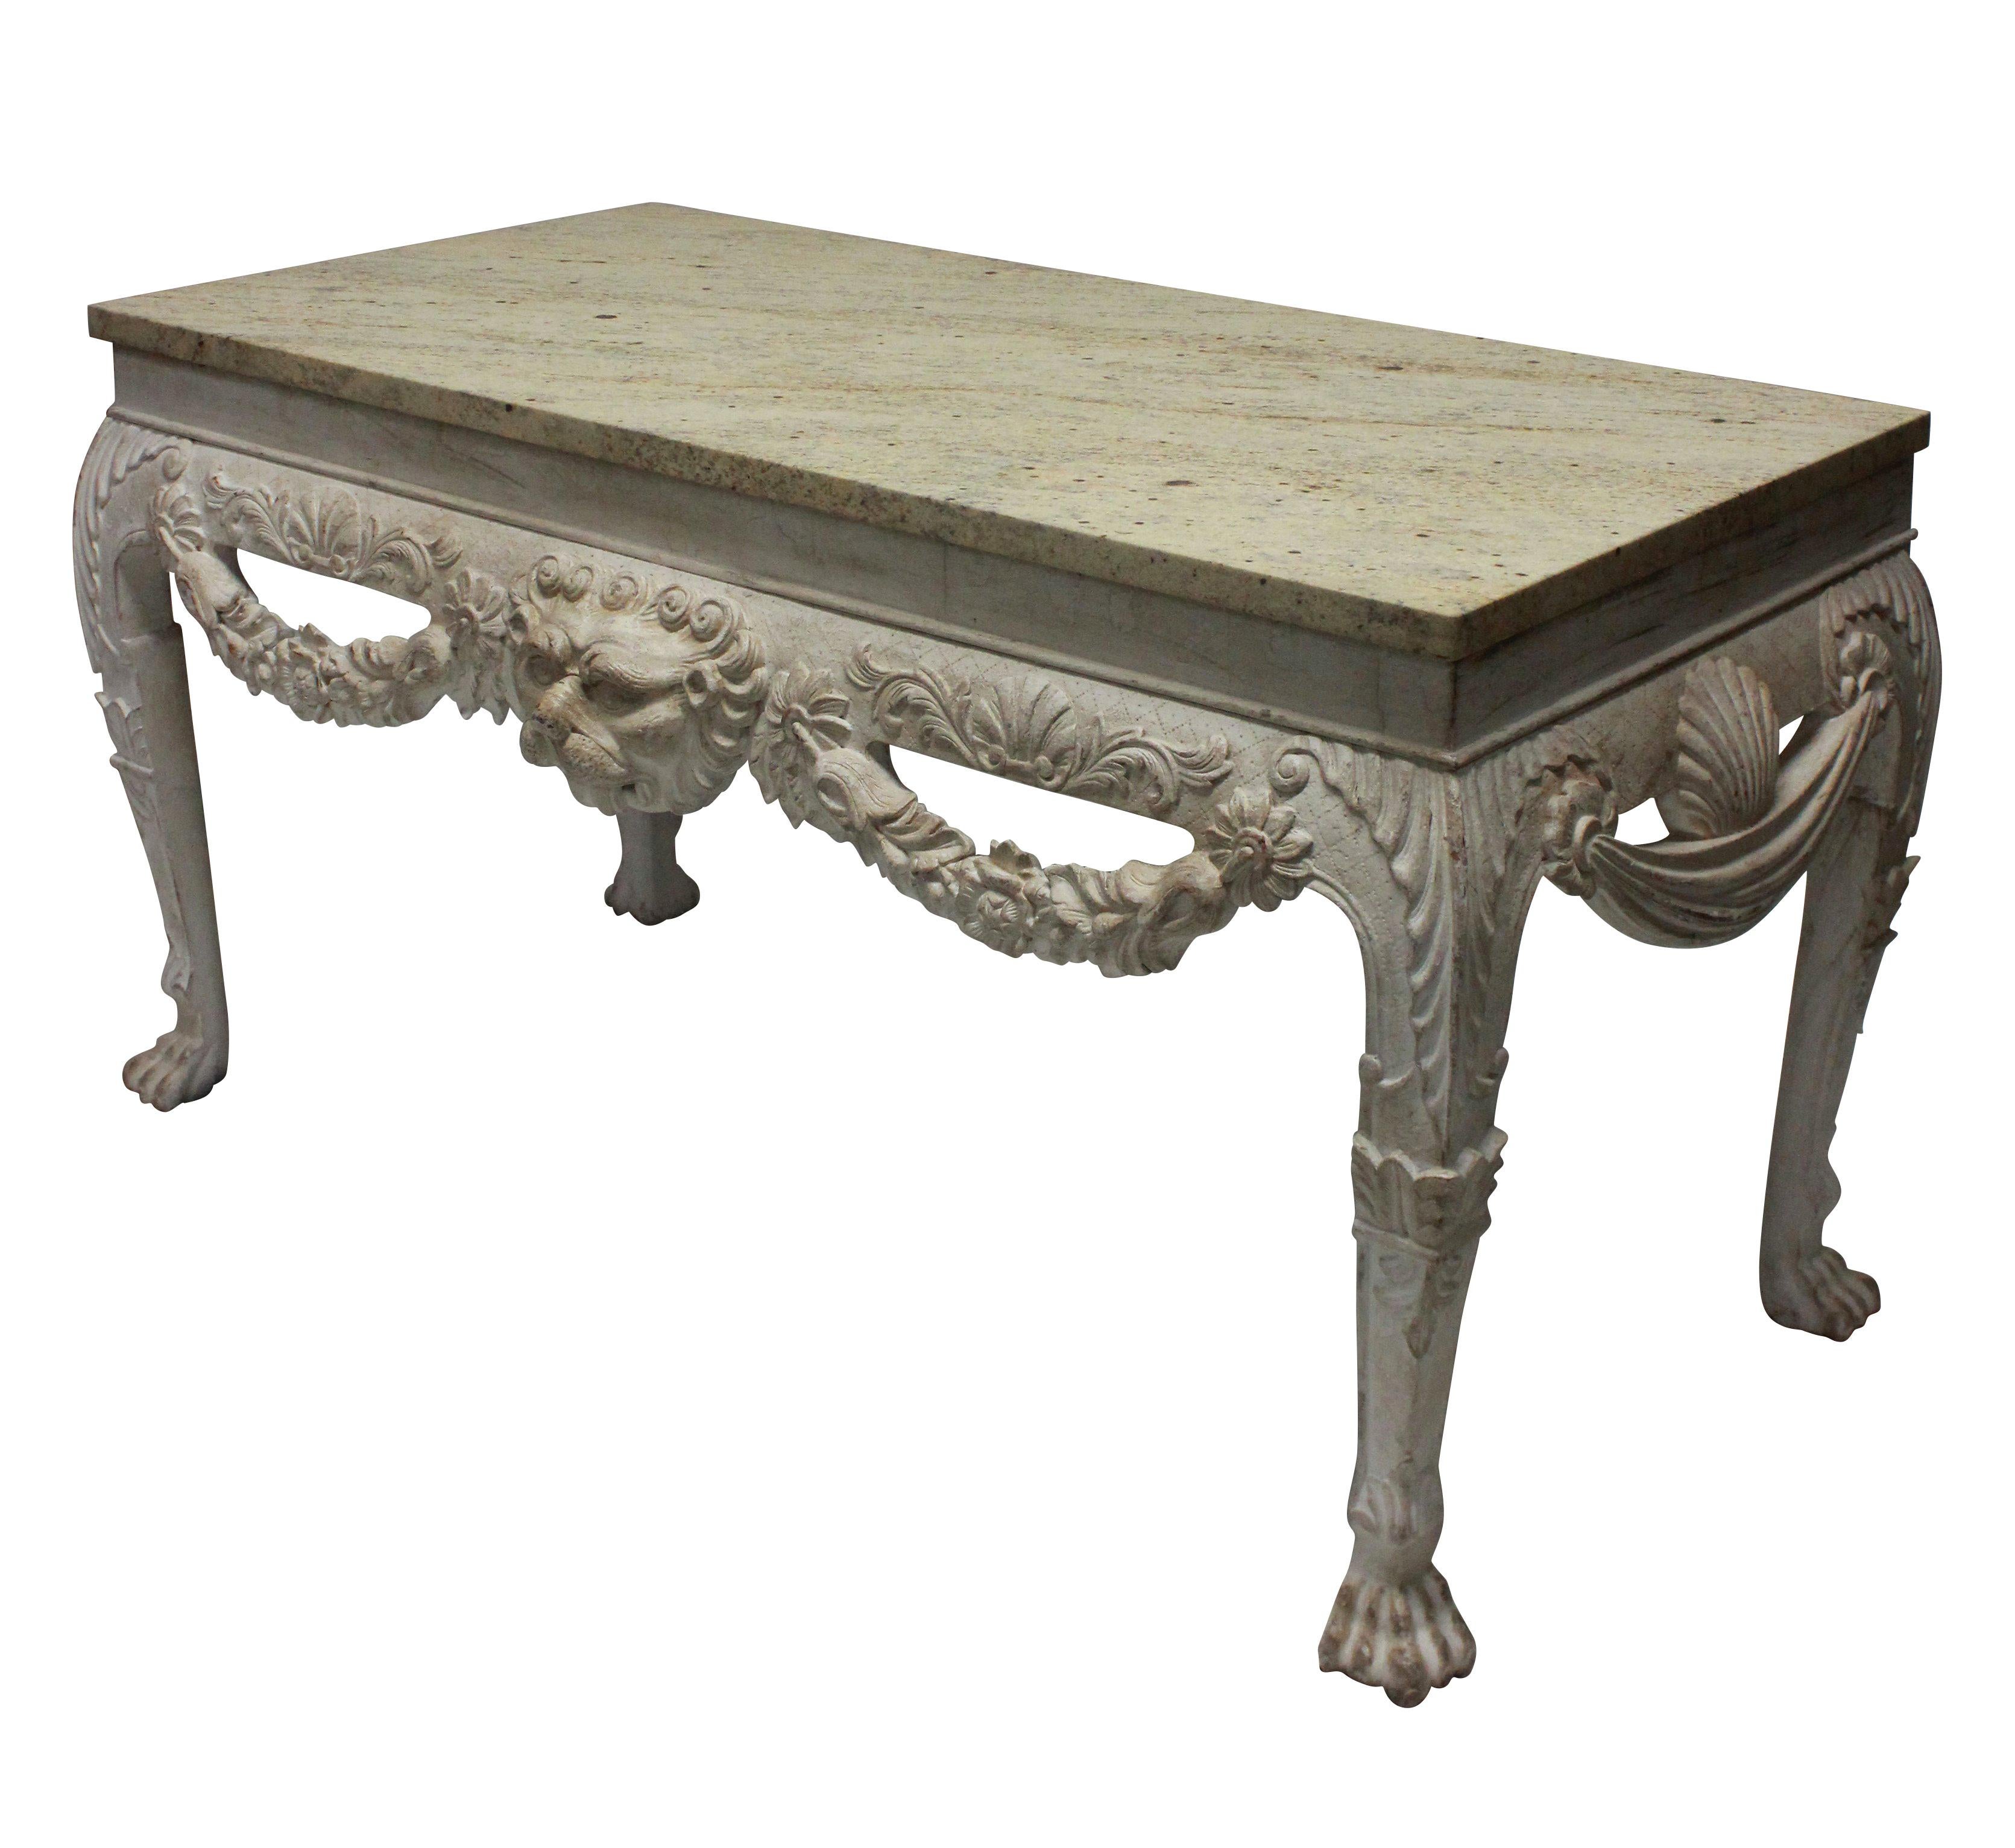 A large pair of English country house console tables in the 18th century manner, with lion masks, swags and acanthus carvings. Distressed painted mahogany with stone colored marble tops.

  